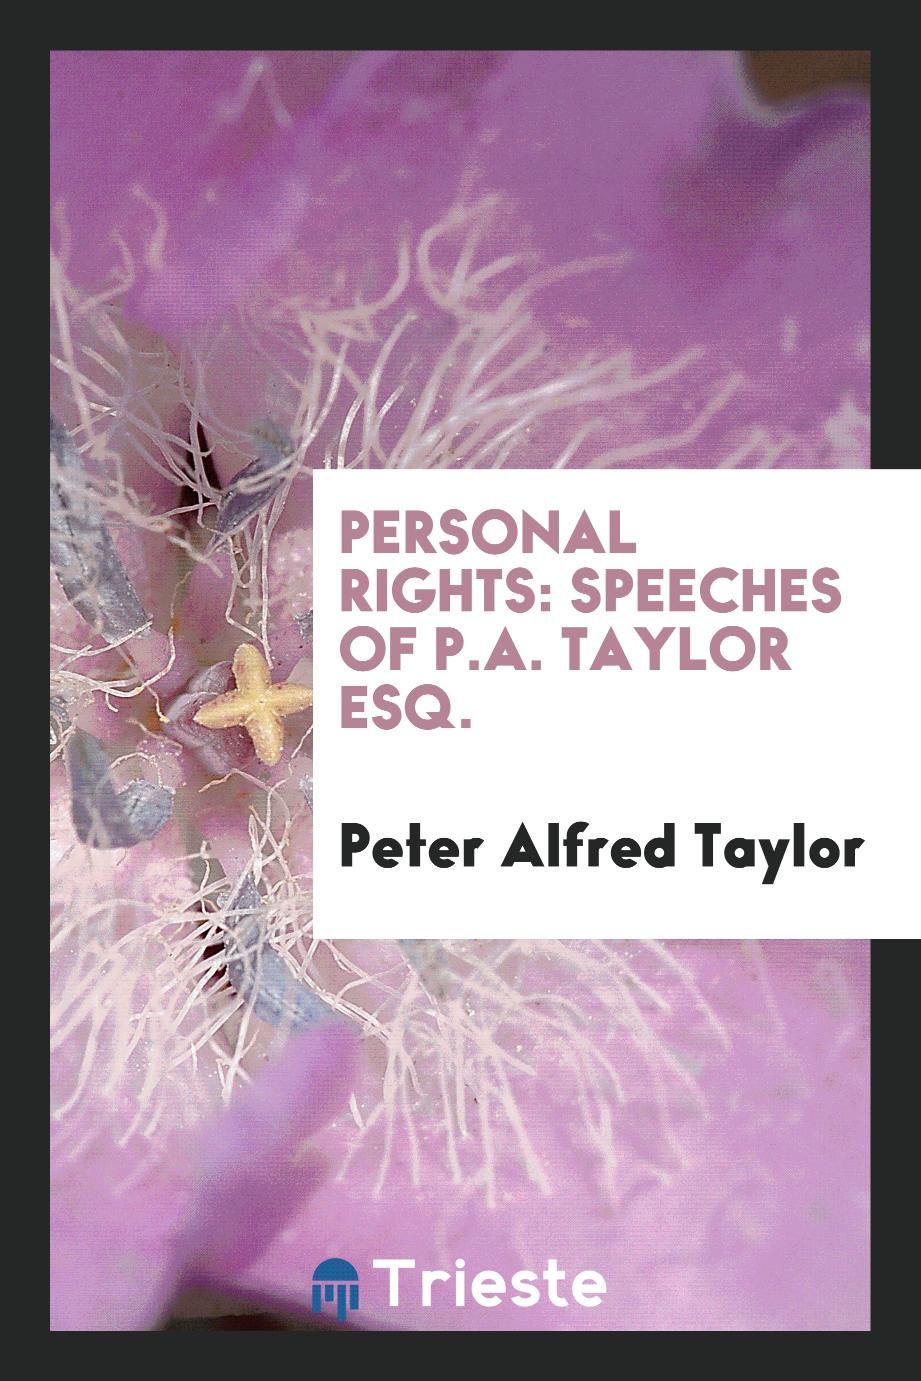 Personal Rights: Speeches of P.A. Taylor Esq.